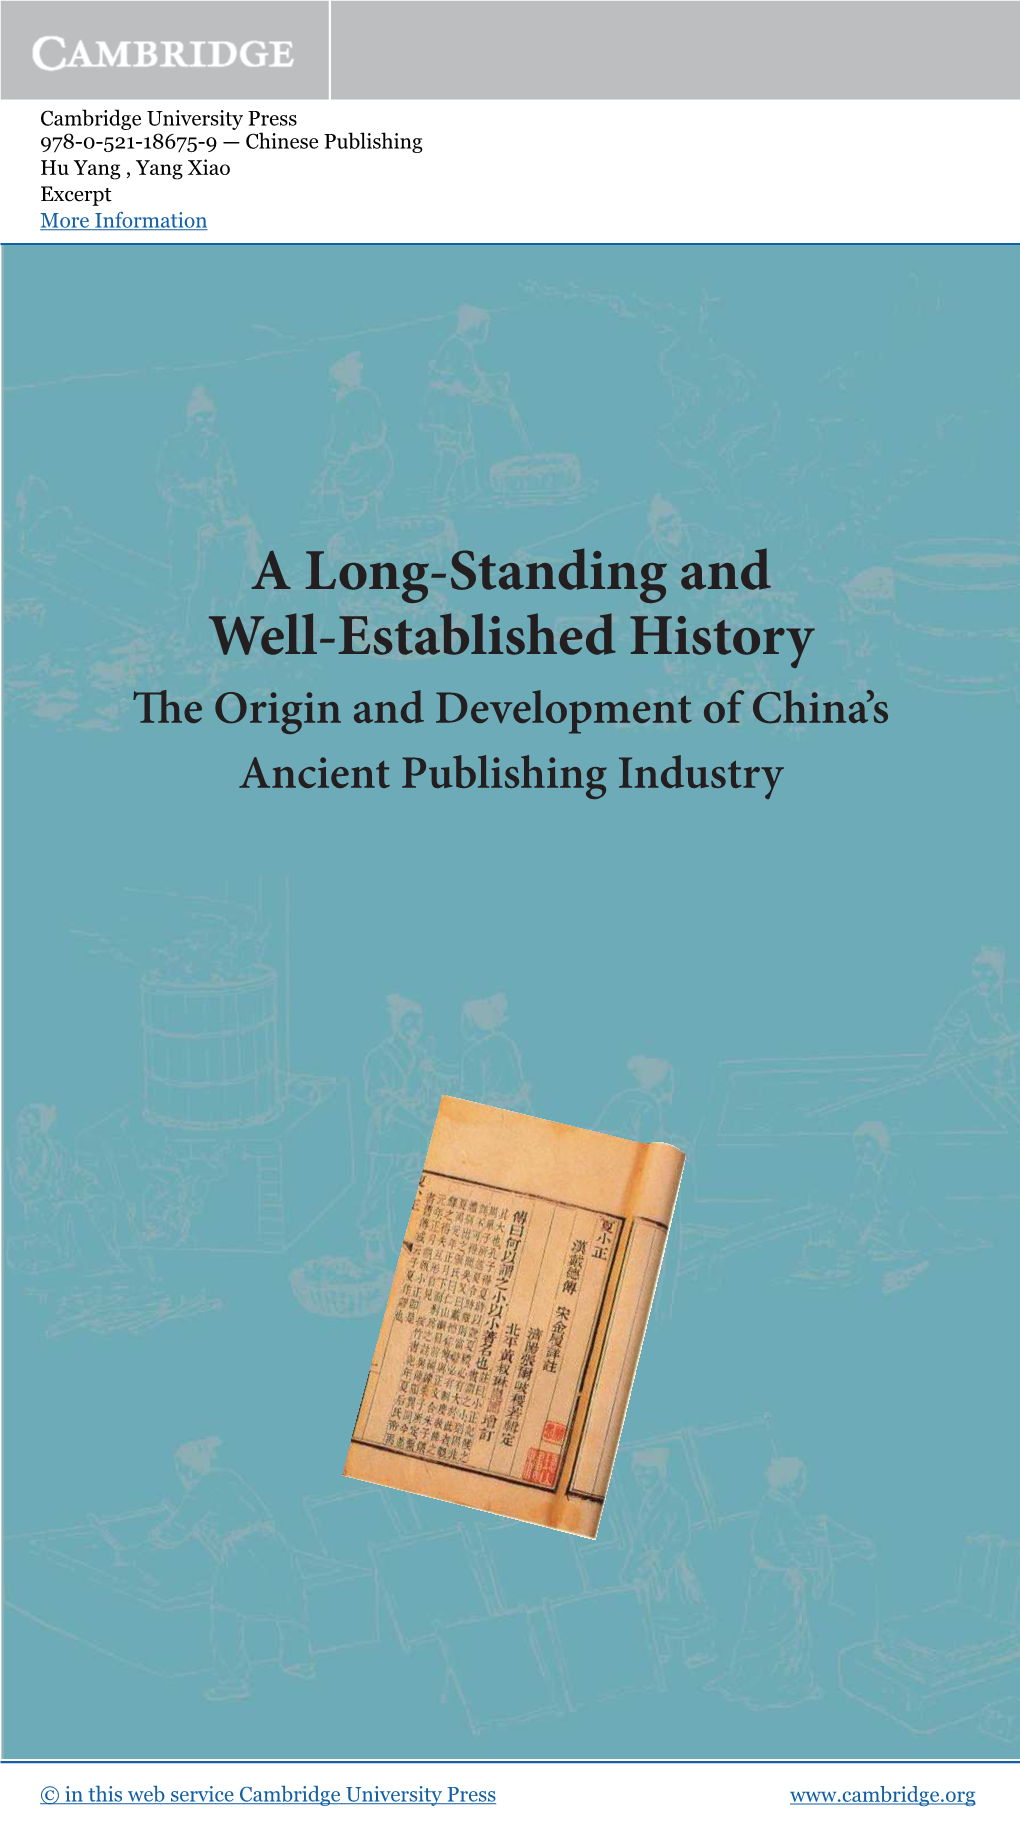 A Long-Standing and Well-Established History Th E Origin and Development of China’S Ancient Publishing Industry